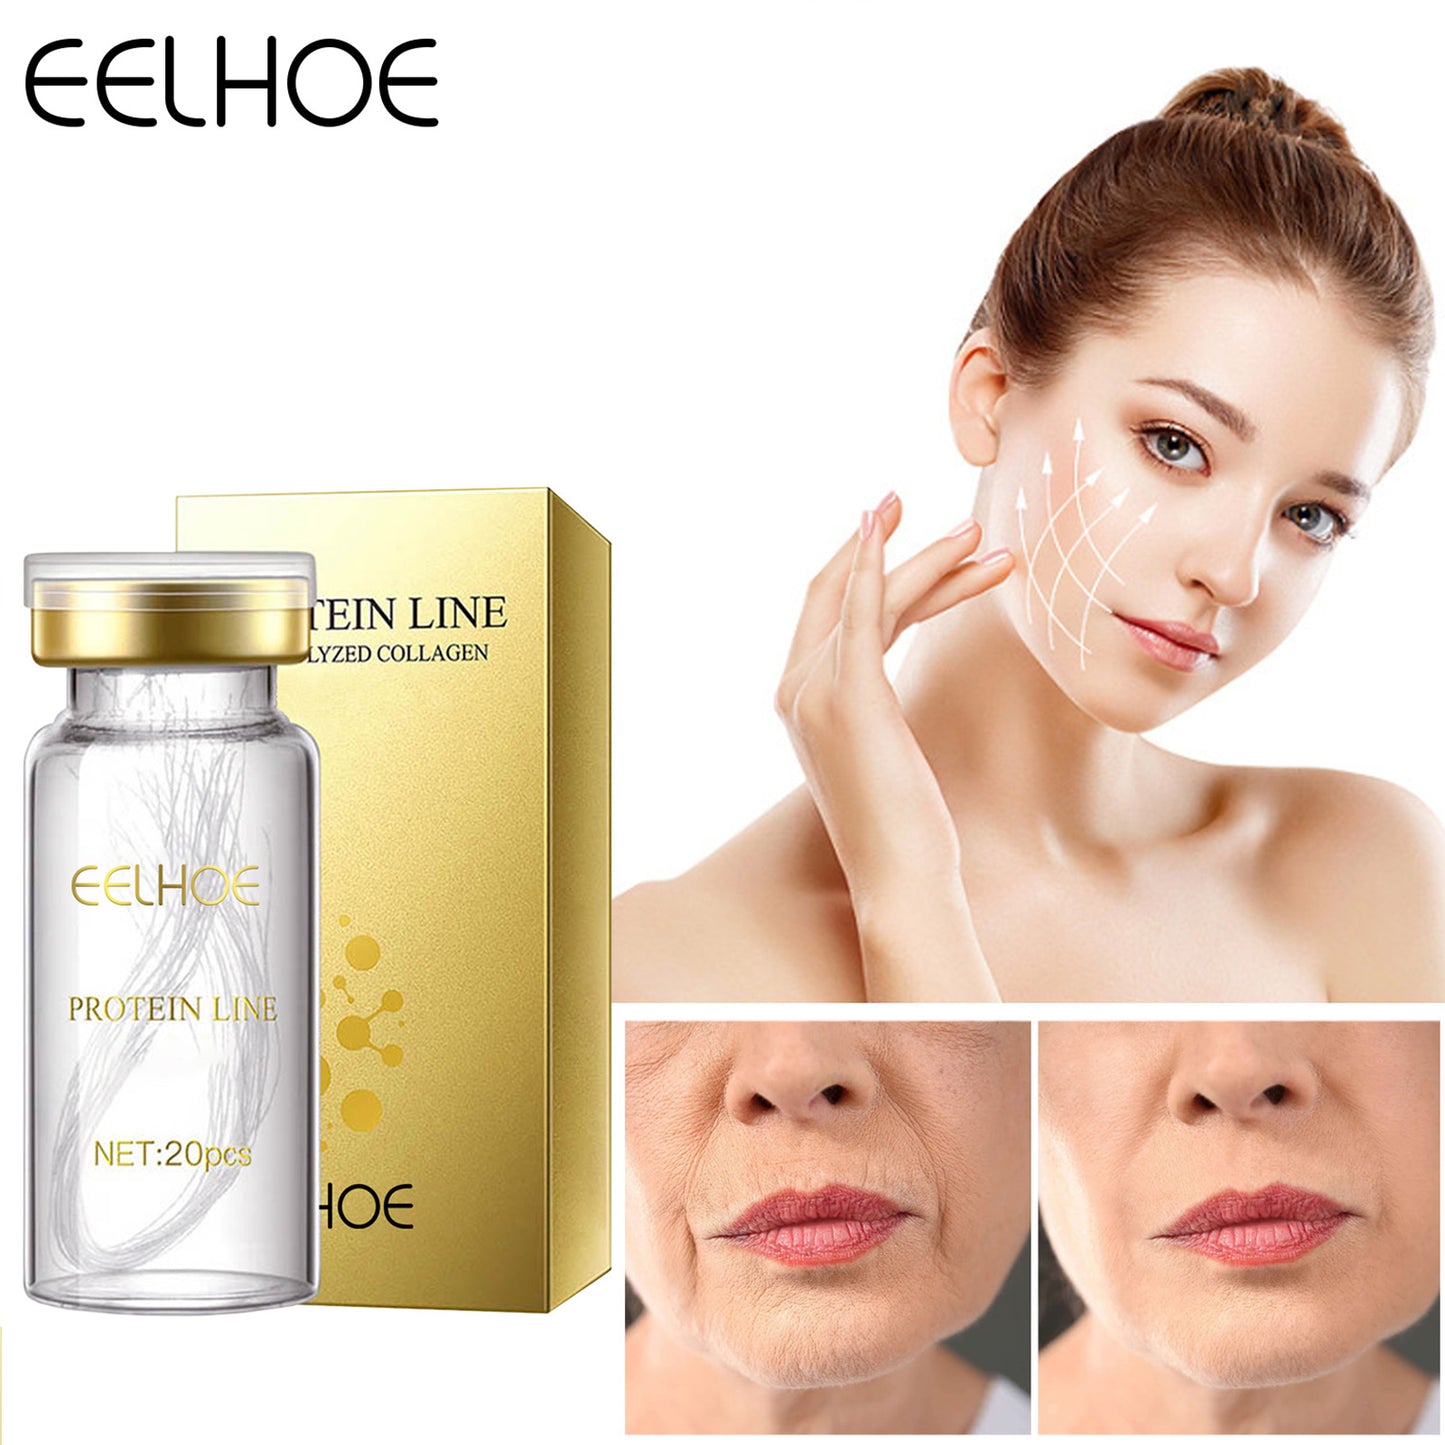 EELHOE Collagen Lifting Line Moisturizing and Desalinating Fine Lines and Wrinkles, Firming the Skin（20pcs）